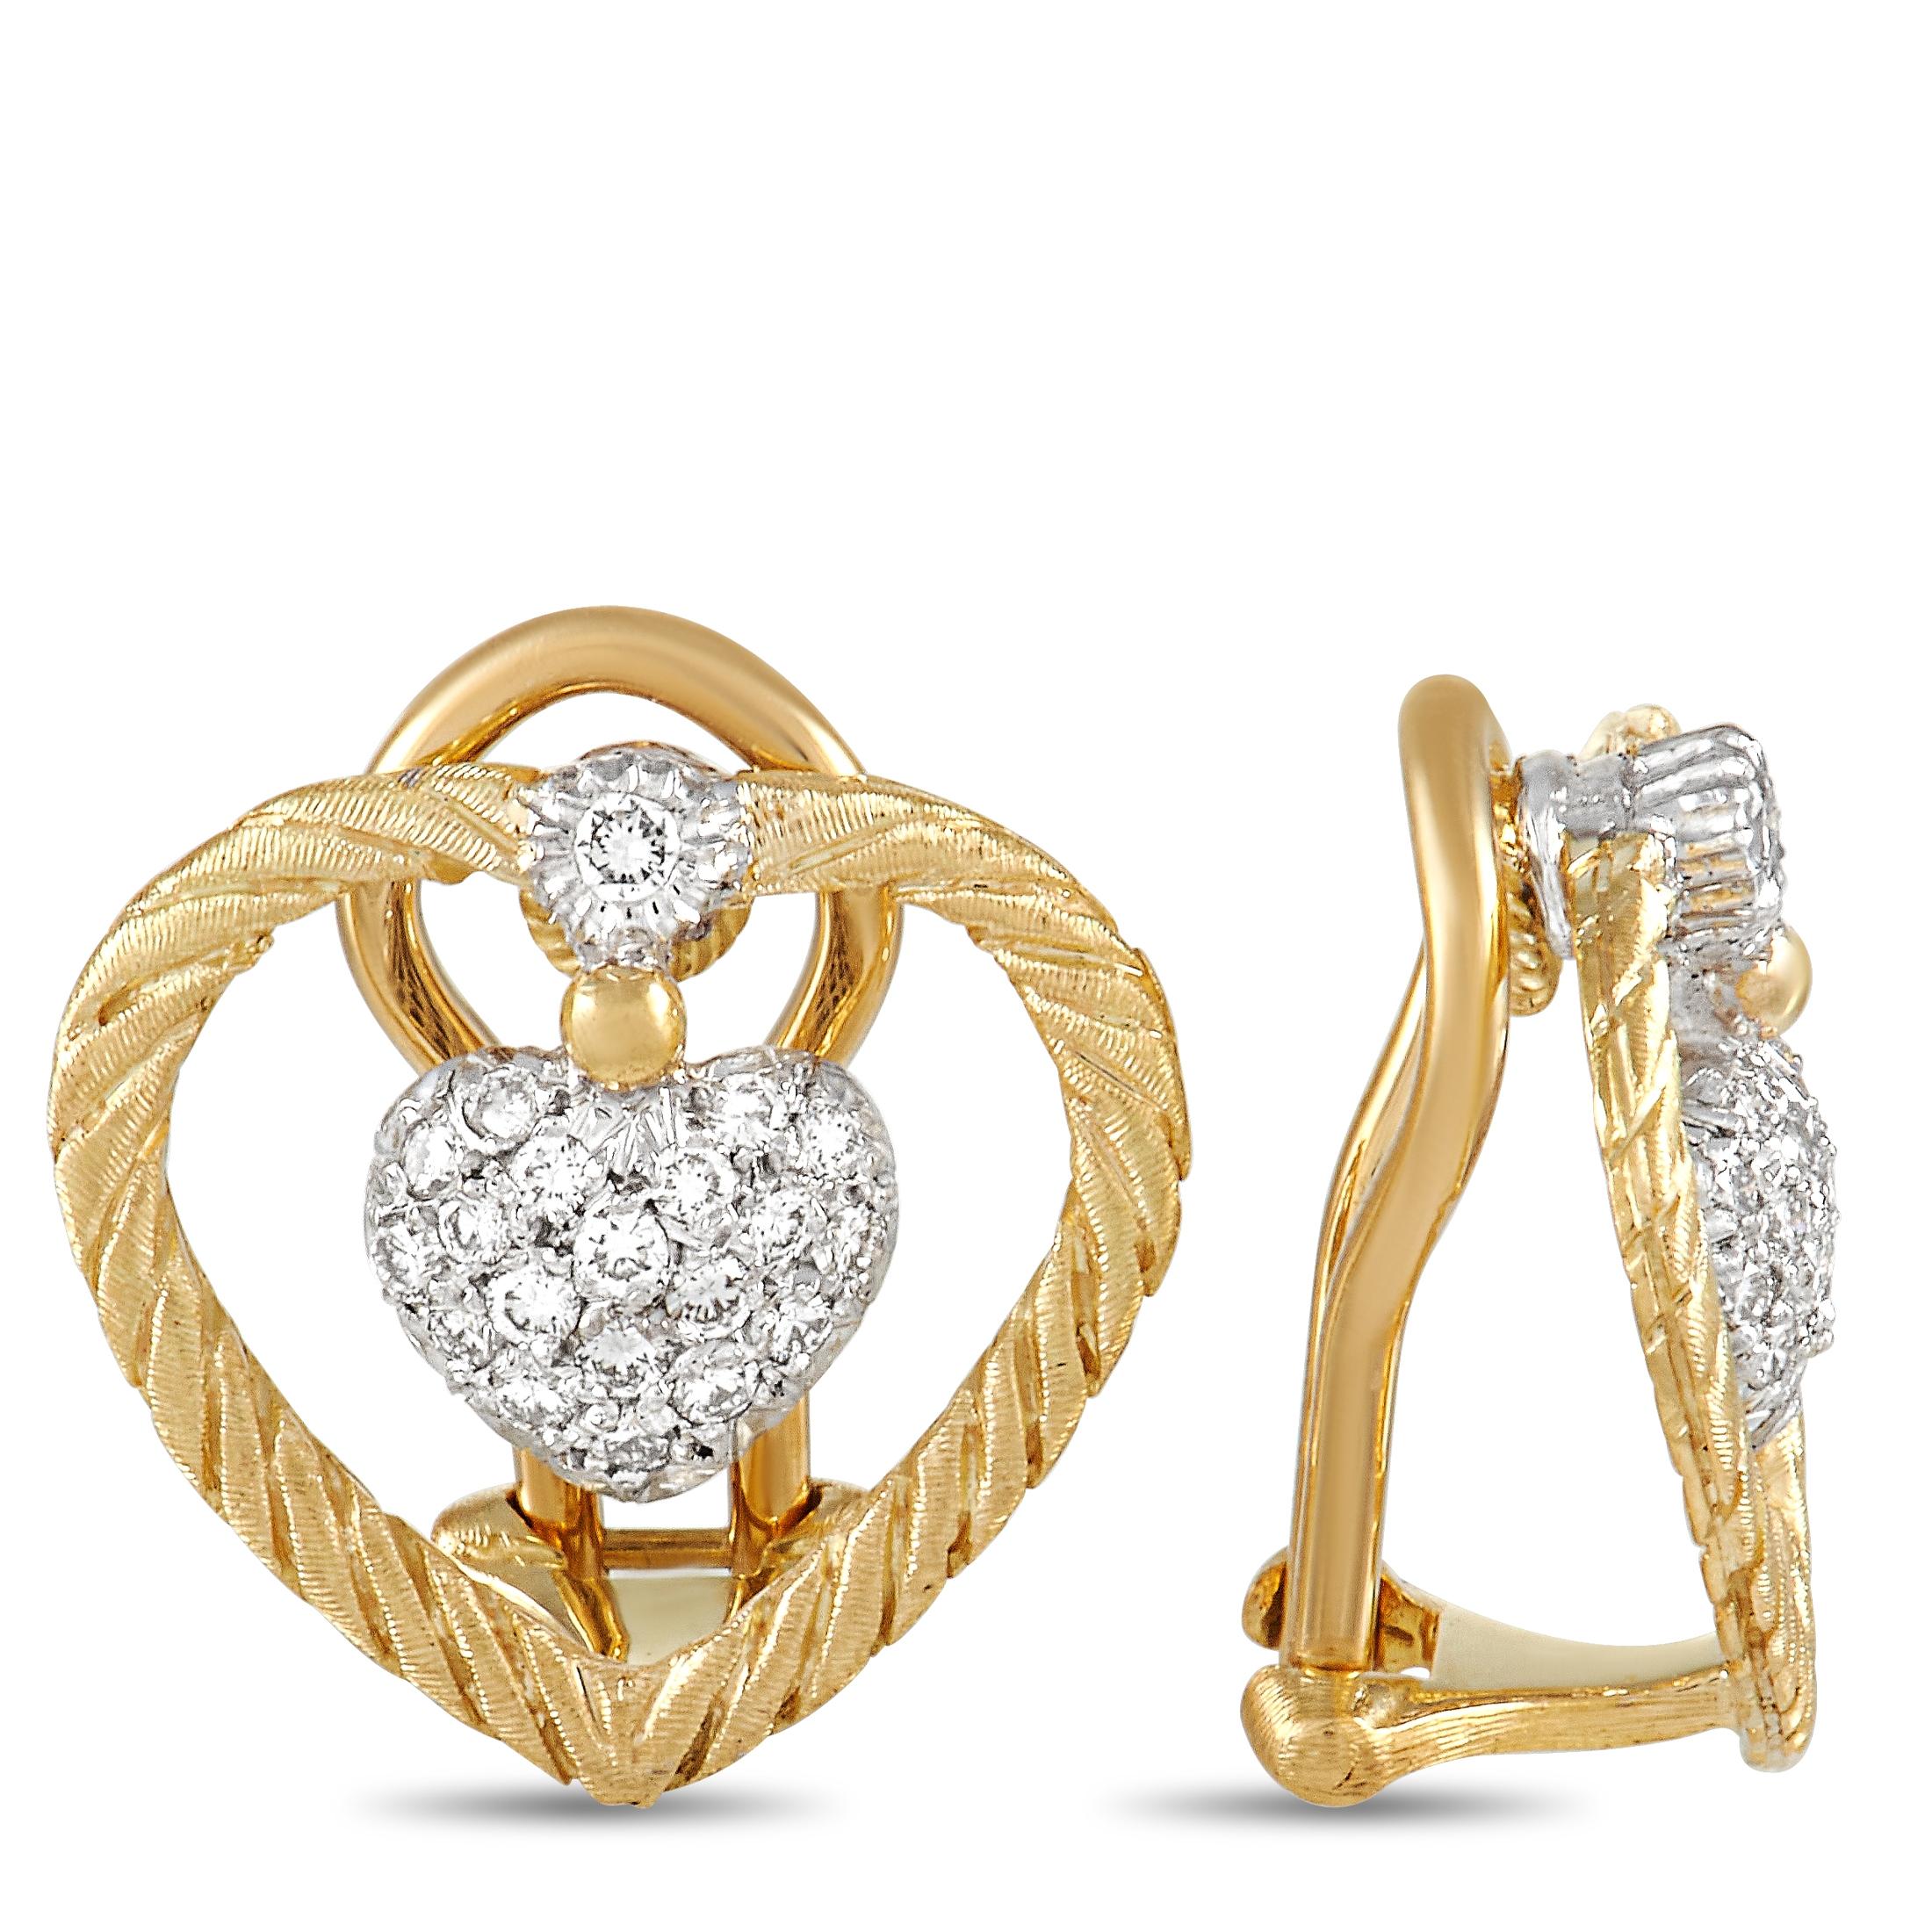 These sweet Buccelatti earrings add the perfect touch of sparkle to any outfit. The earrings are made with 18K yellow gold, forming an openwork heart with a smaller heart charm set in the center of each. The inner heart is set with a cluster of